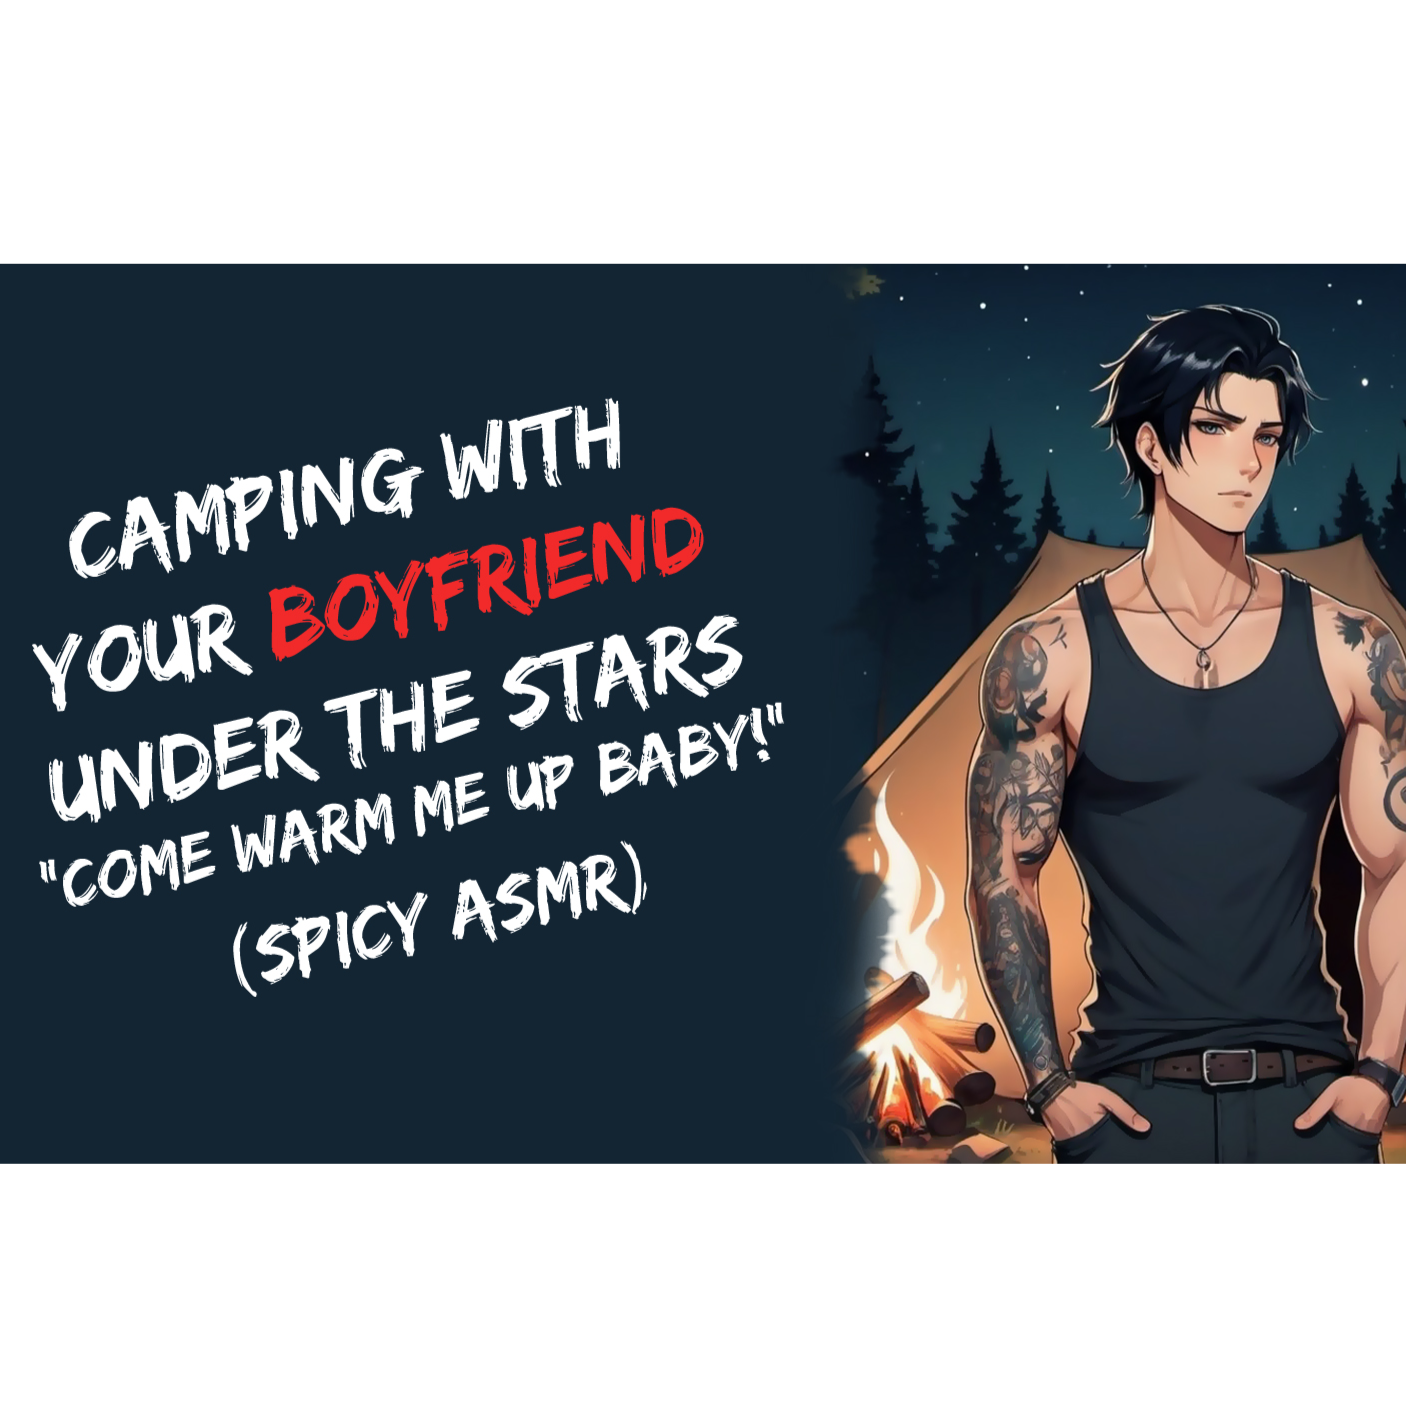 Camping With Your Boyfriend Under The Stars "Come Warm Me Up Baby!" (Spicy ASMR)